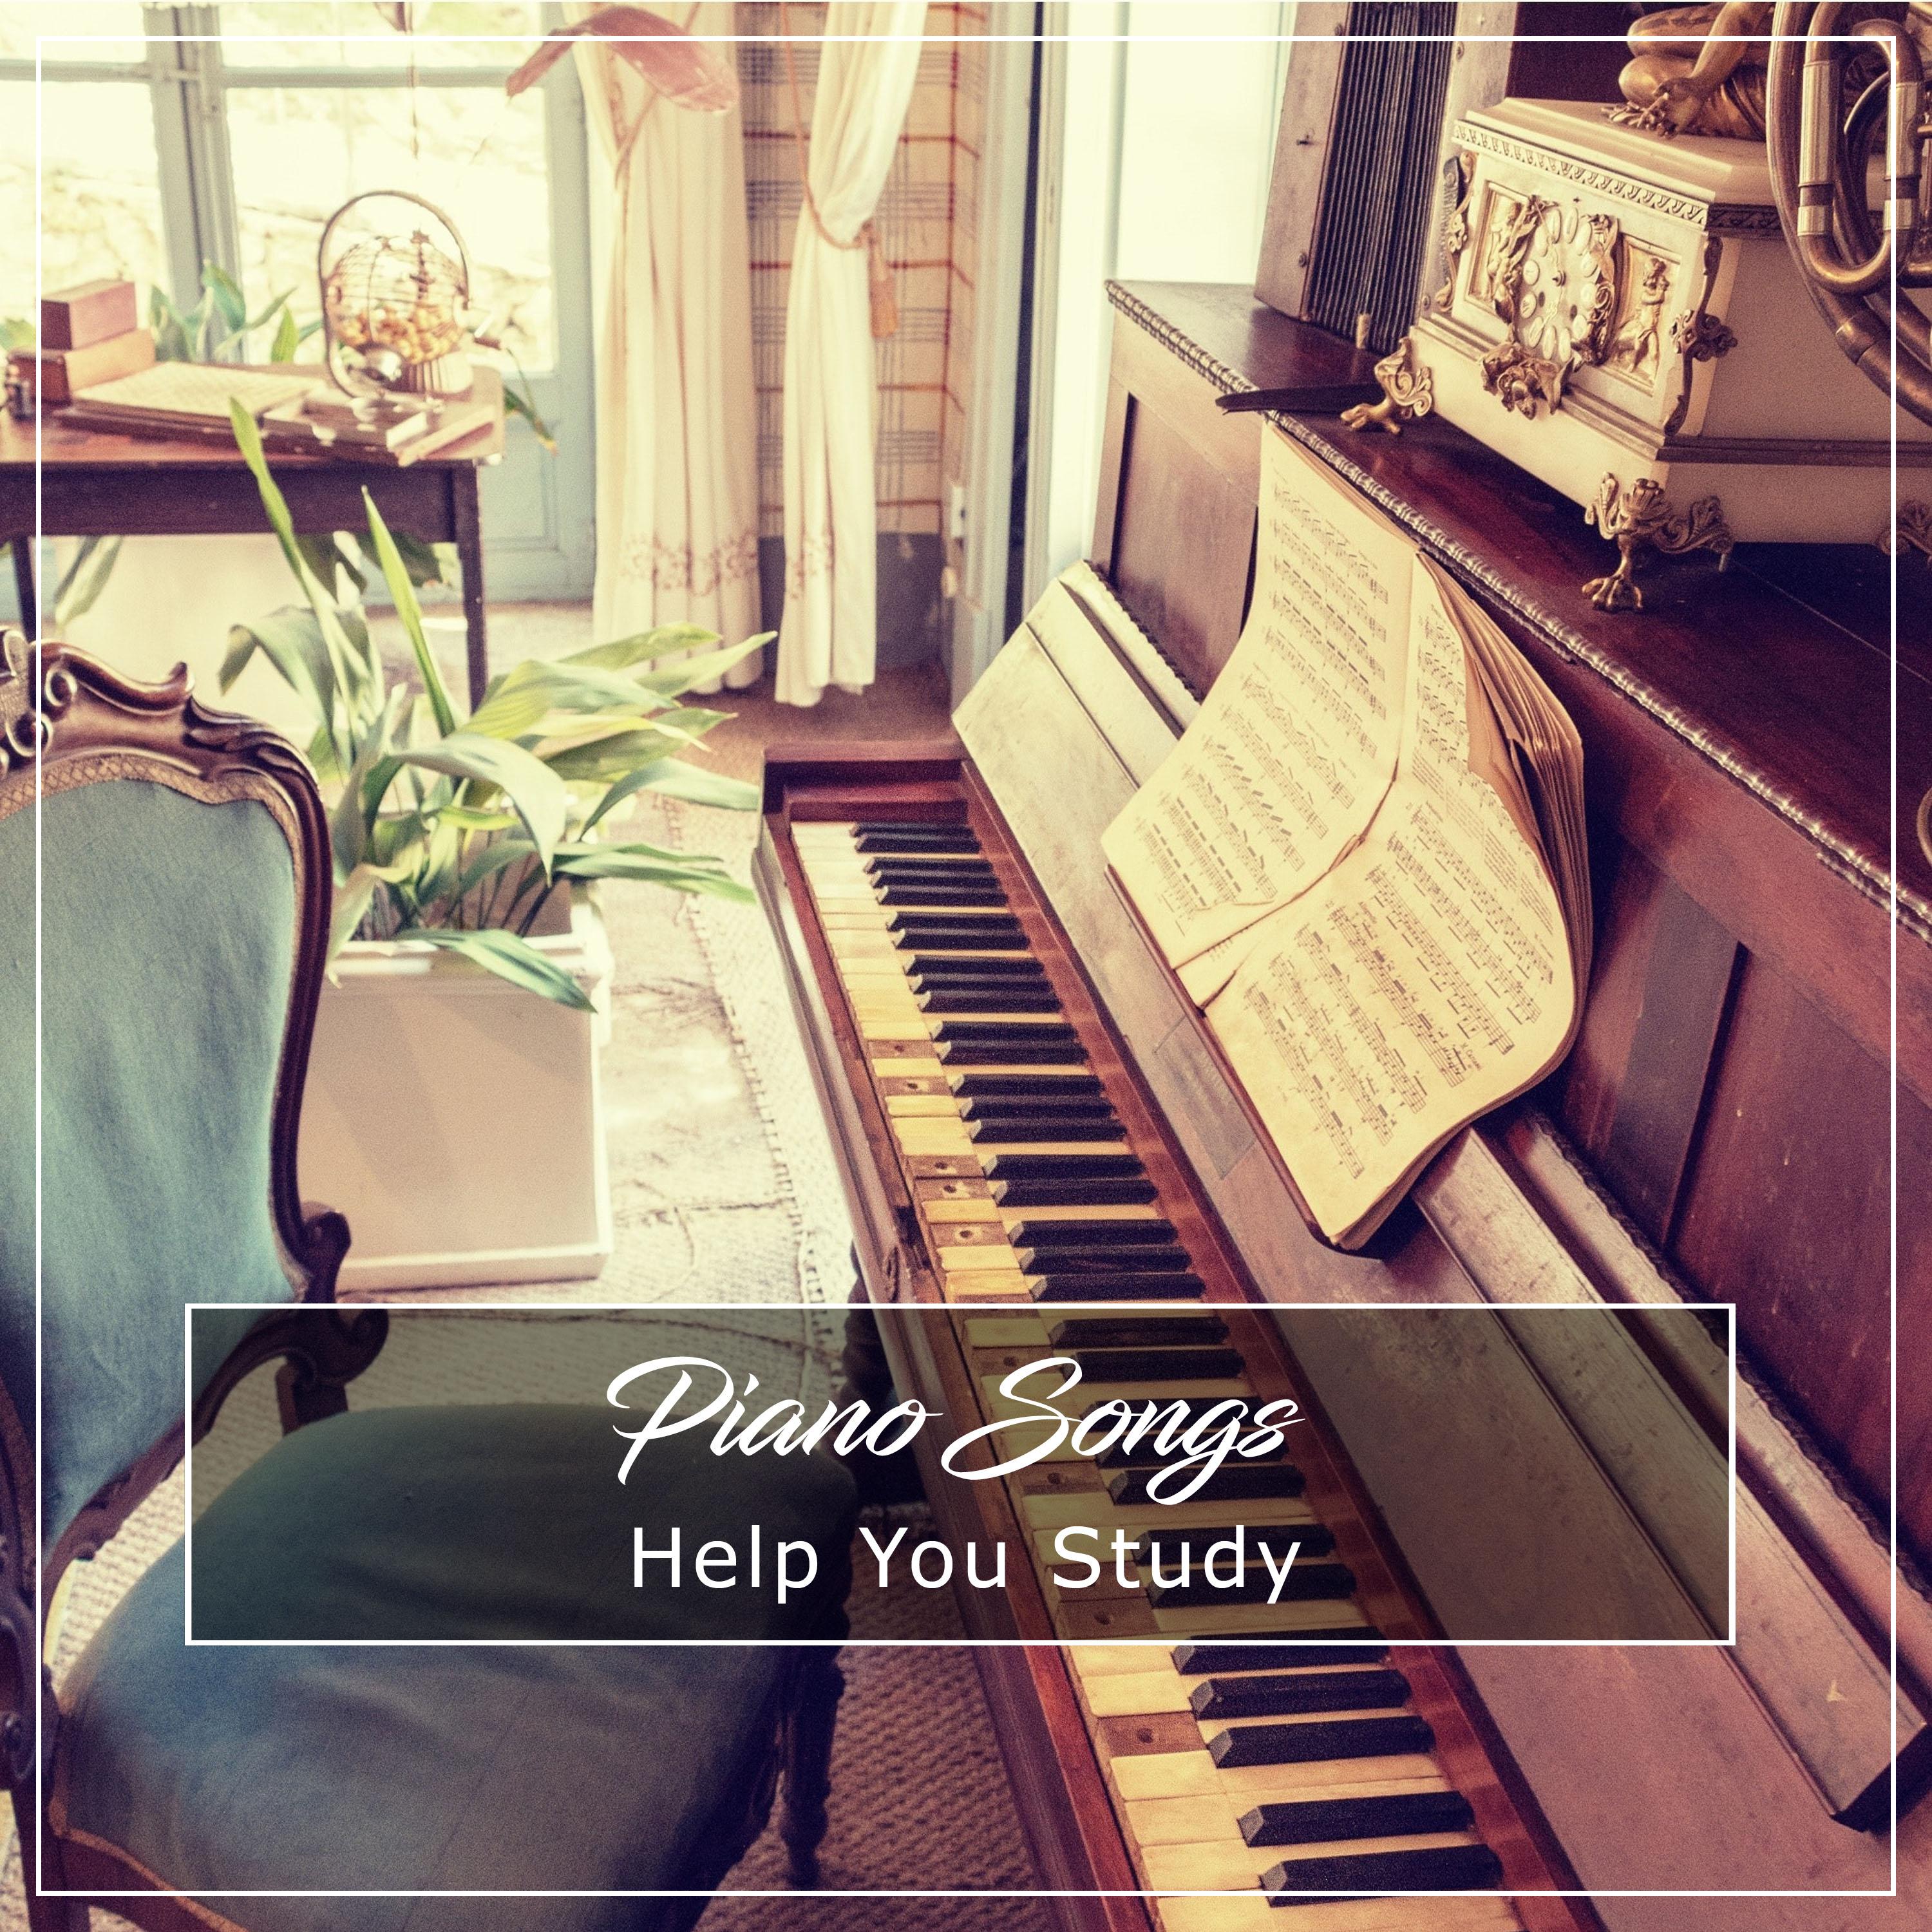 12 Piano Songs to Help you Study